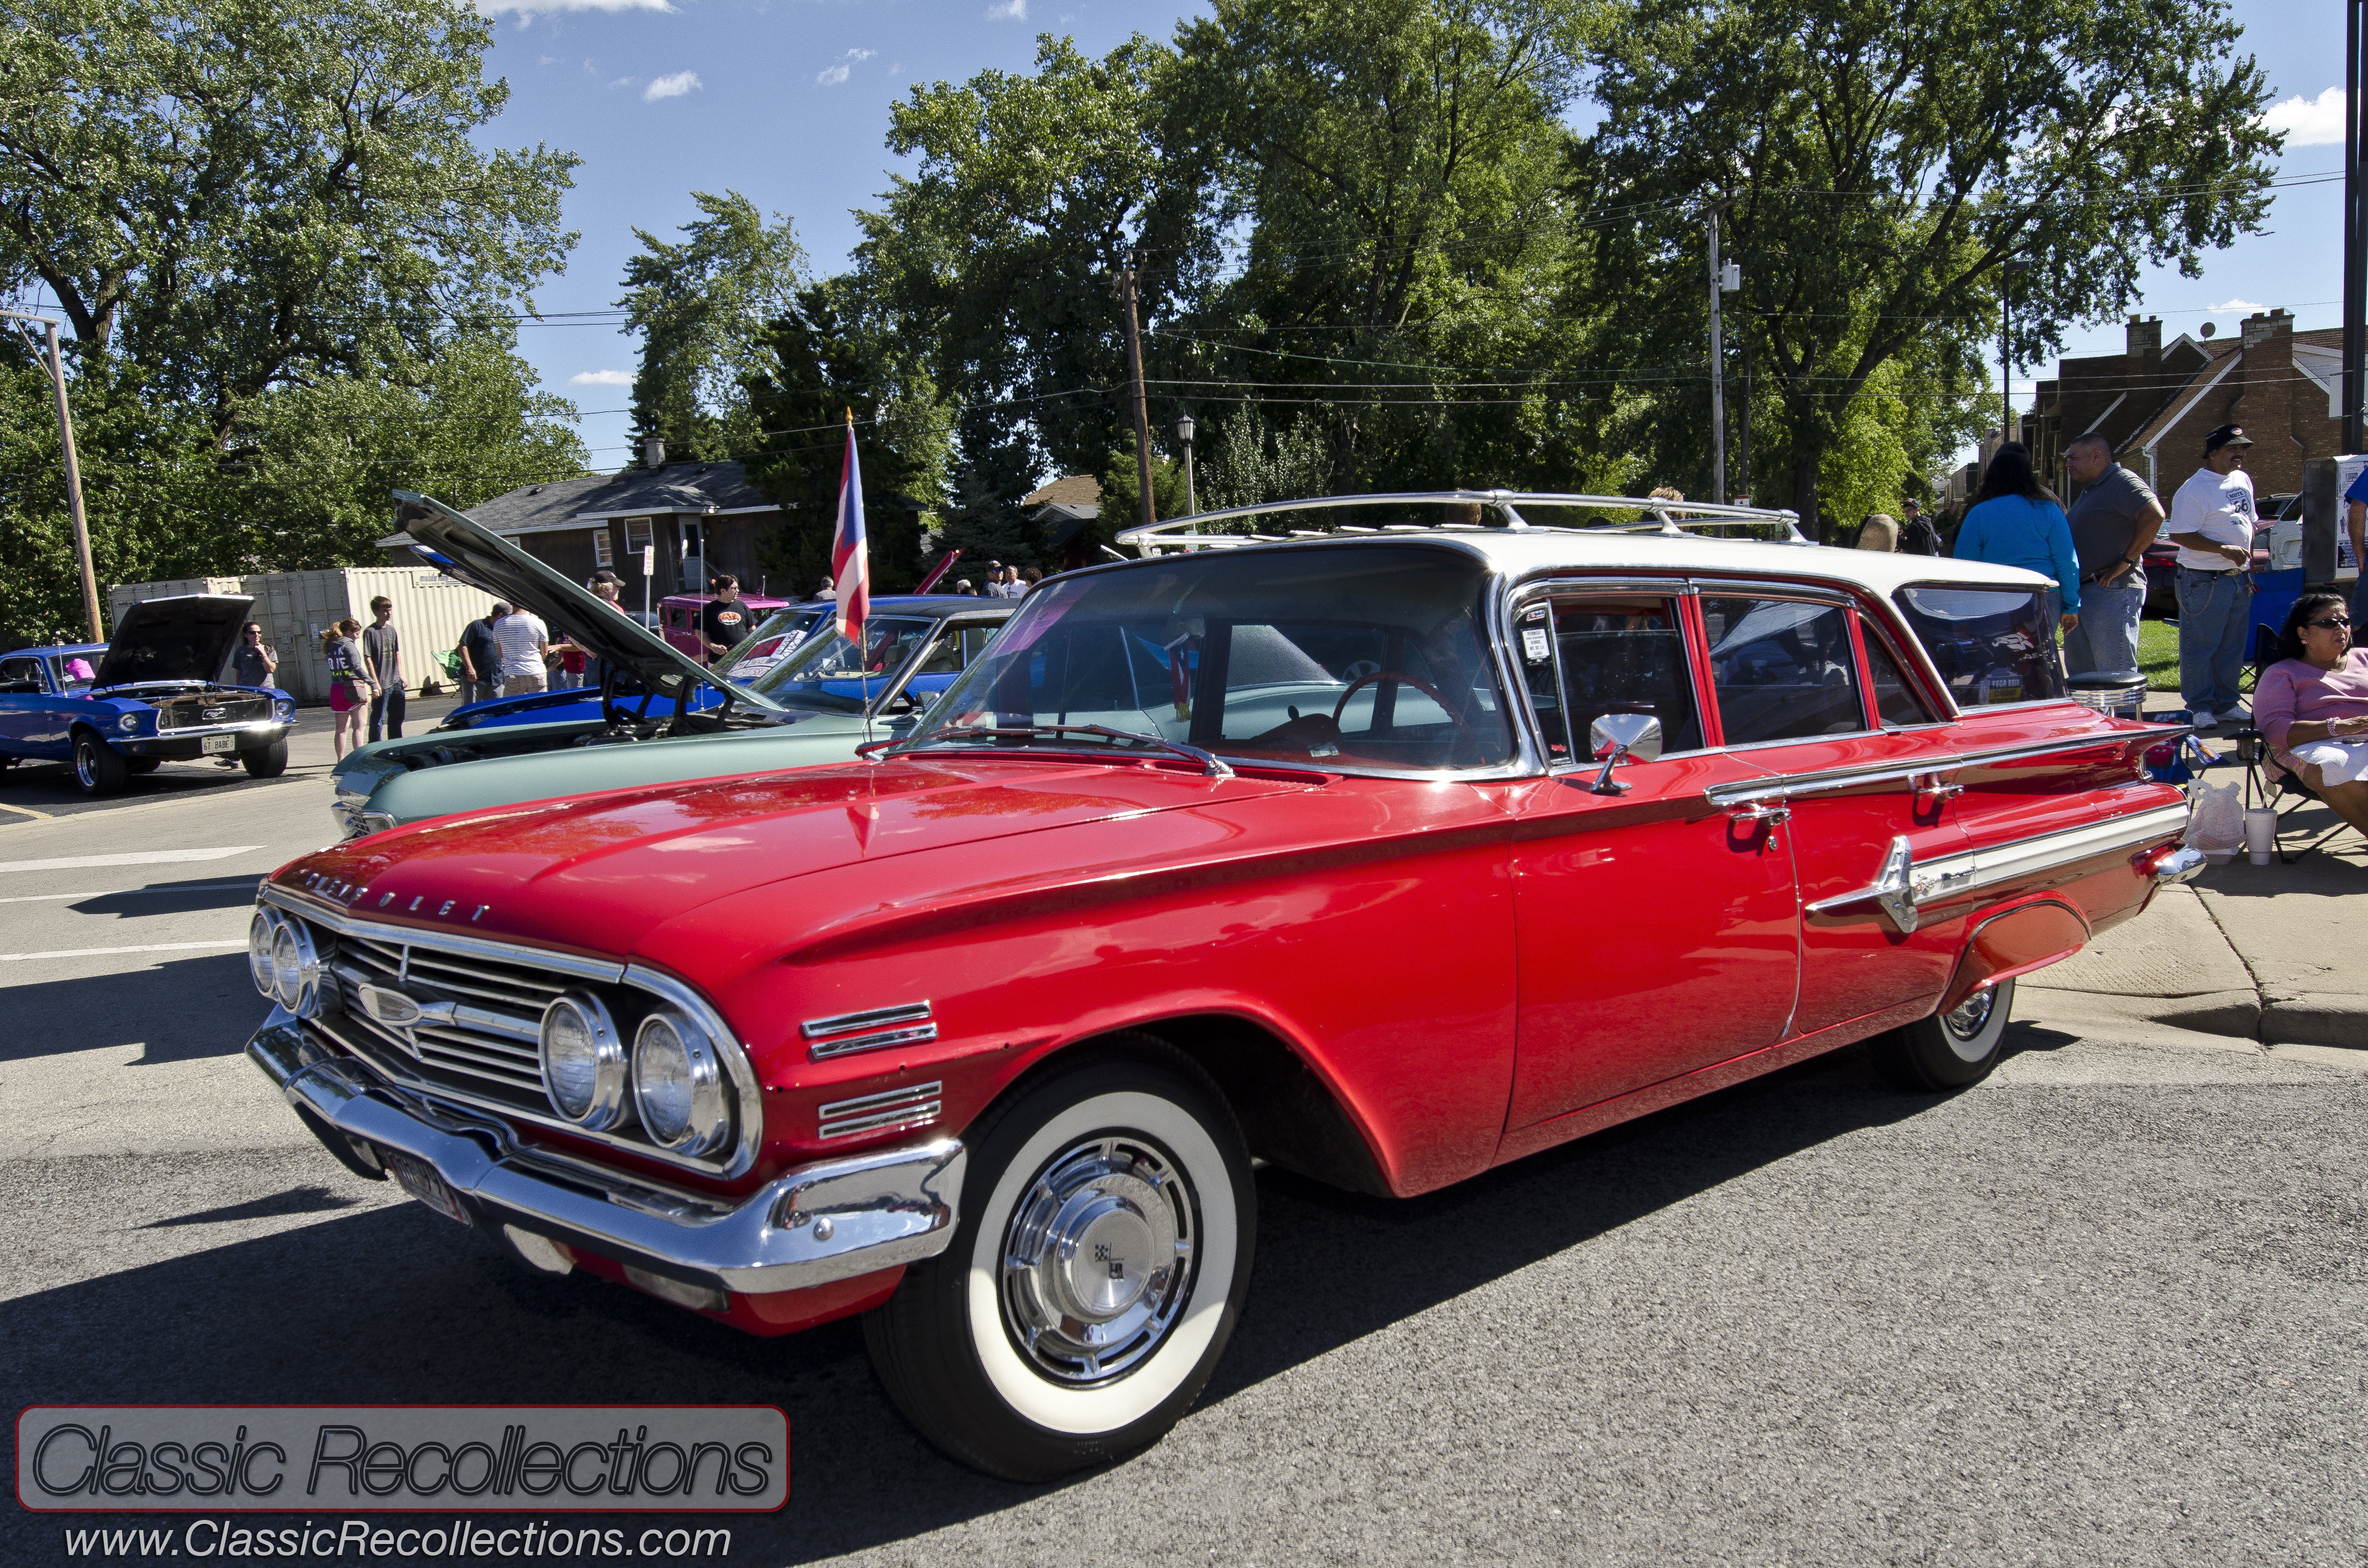 CAR SHOW: 1960 Chevrolet Nomad Wagon – Classic Recollections